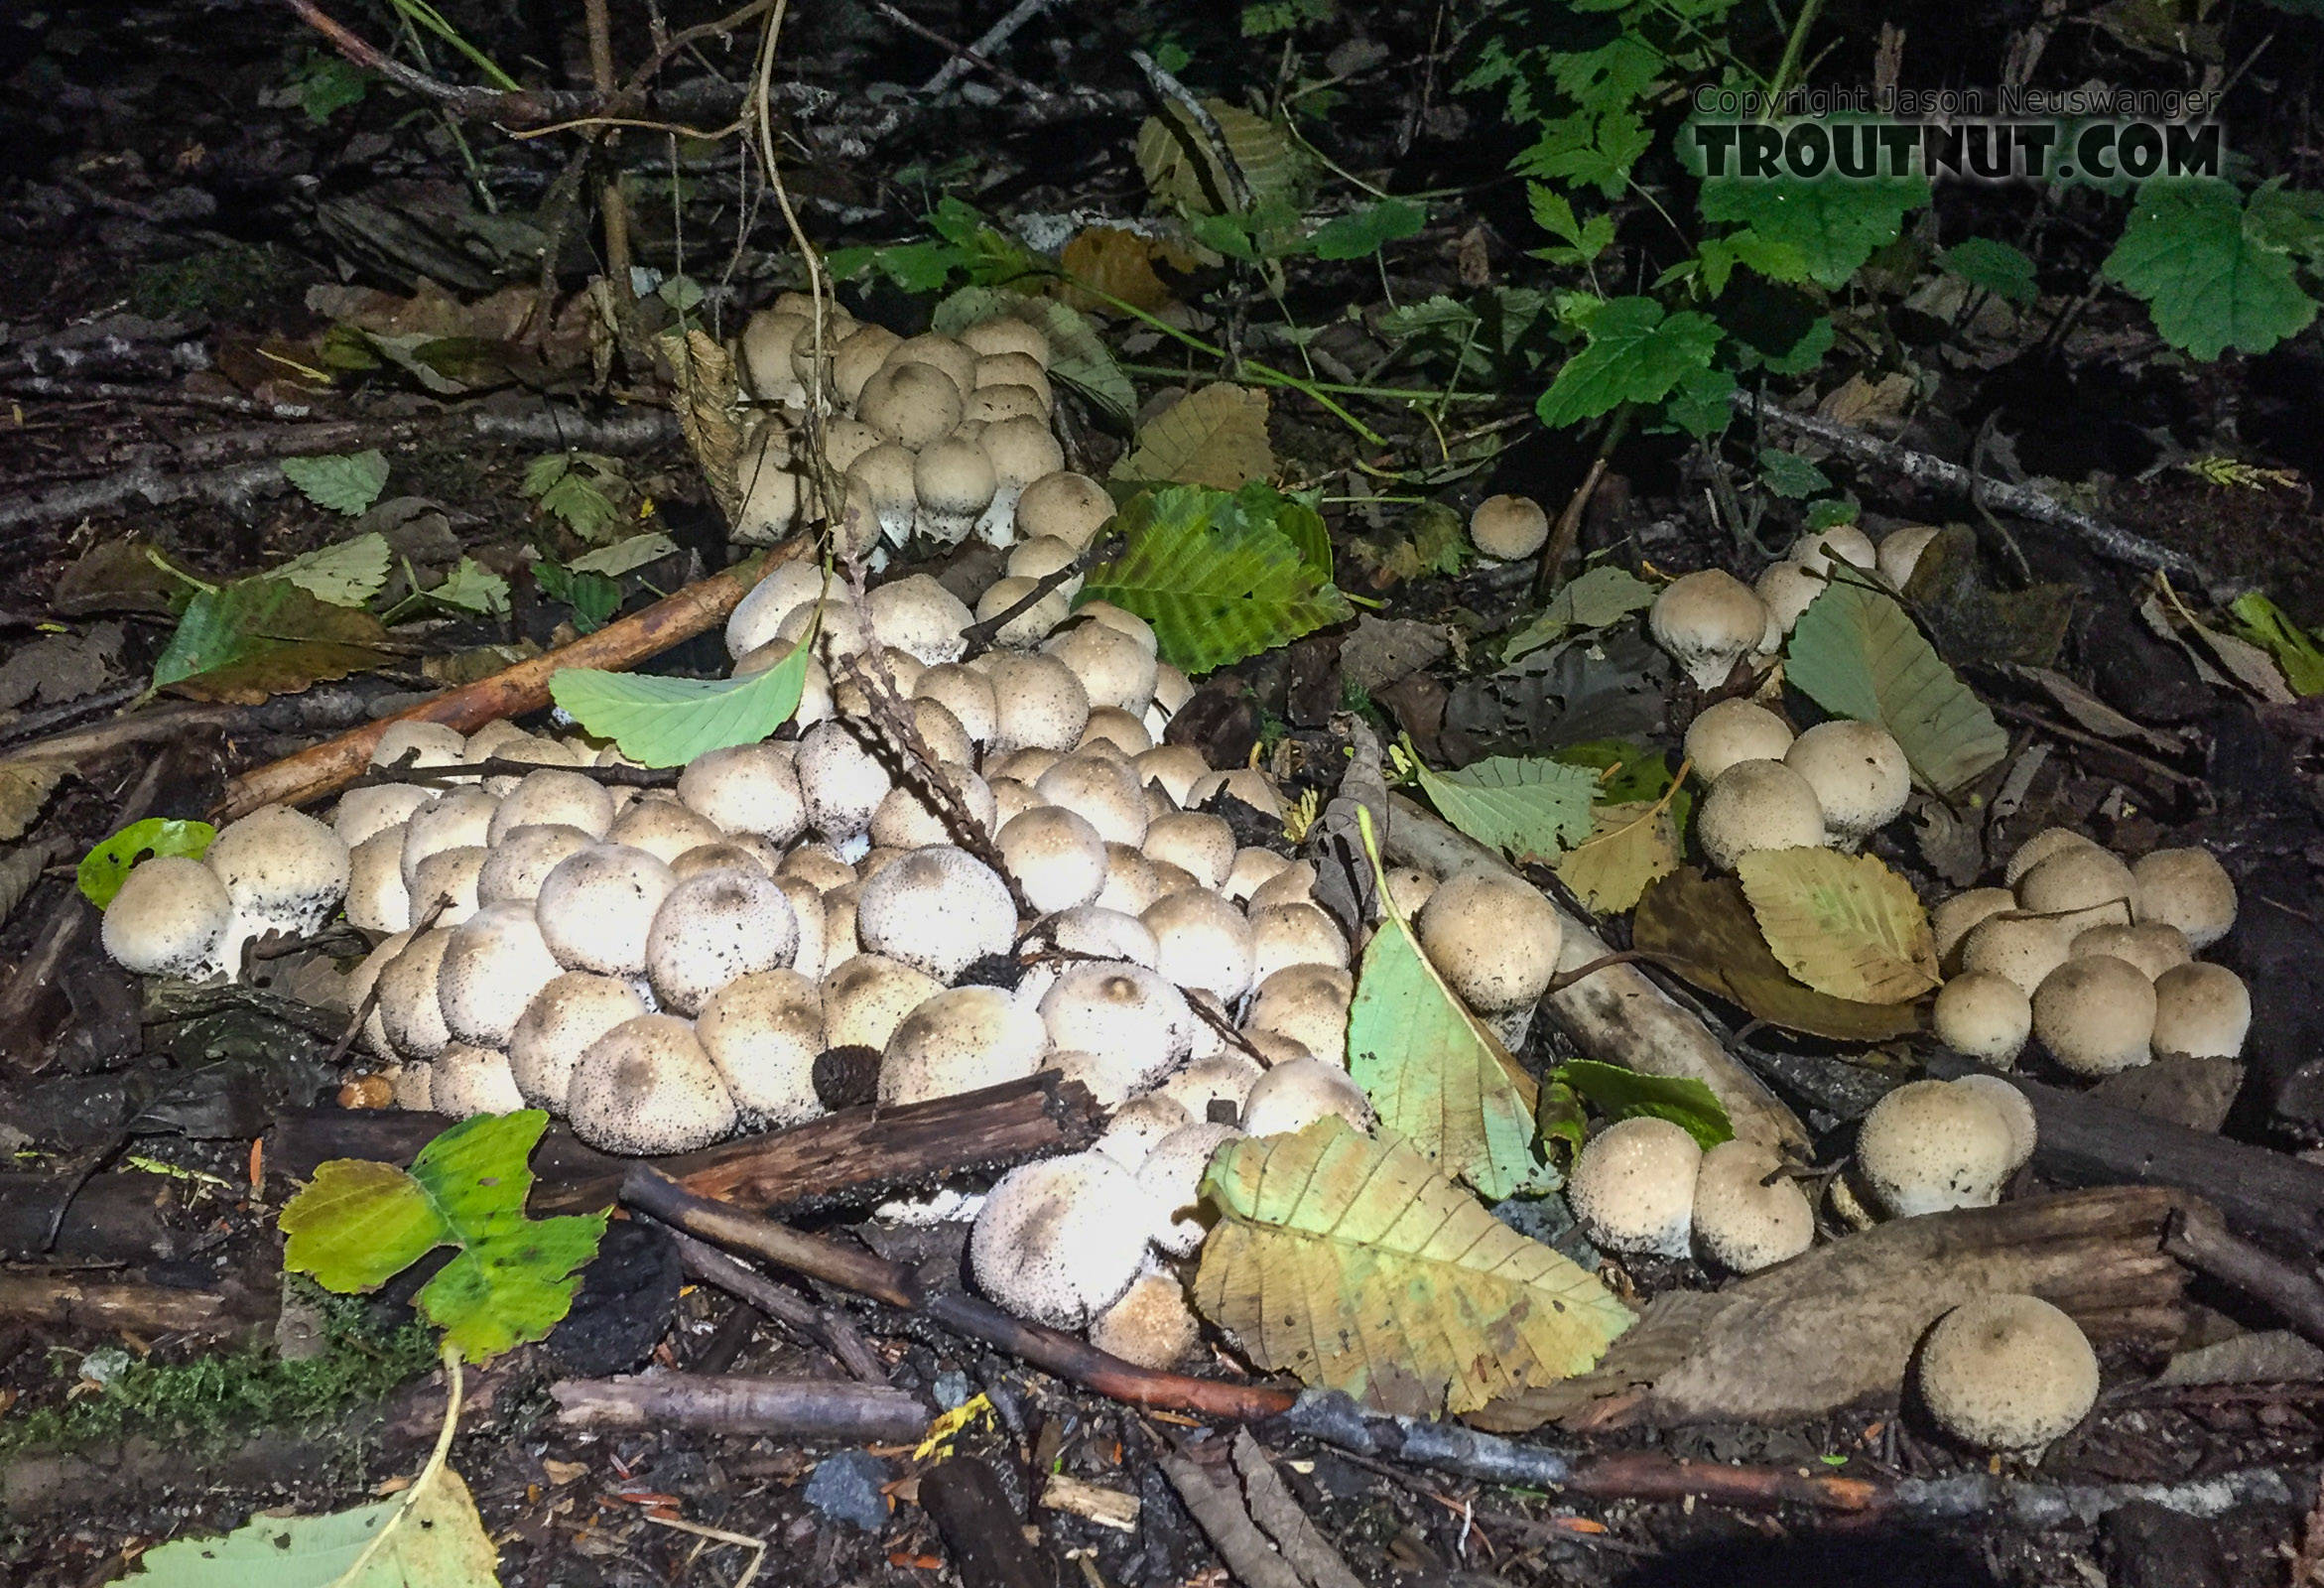 Big patch of edible puffballs. From the Taylor River in Washington.